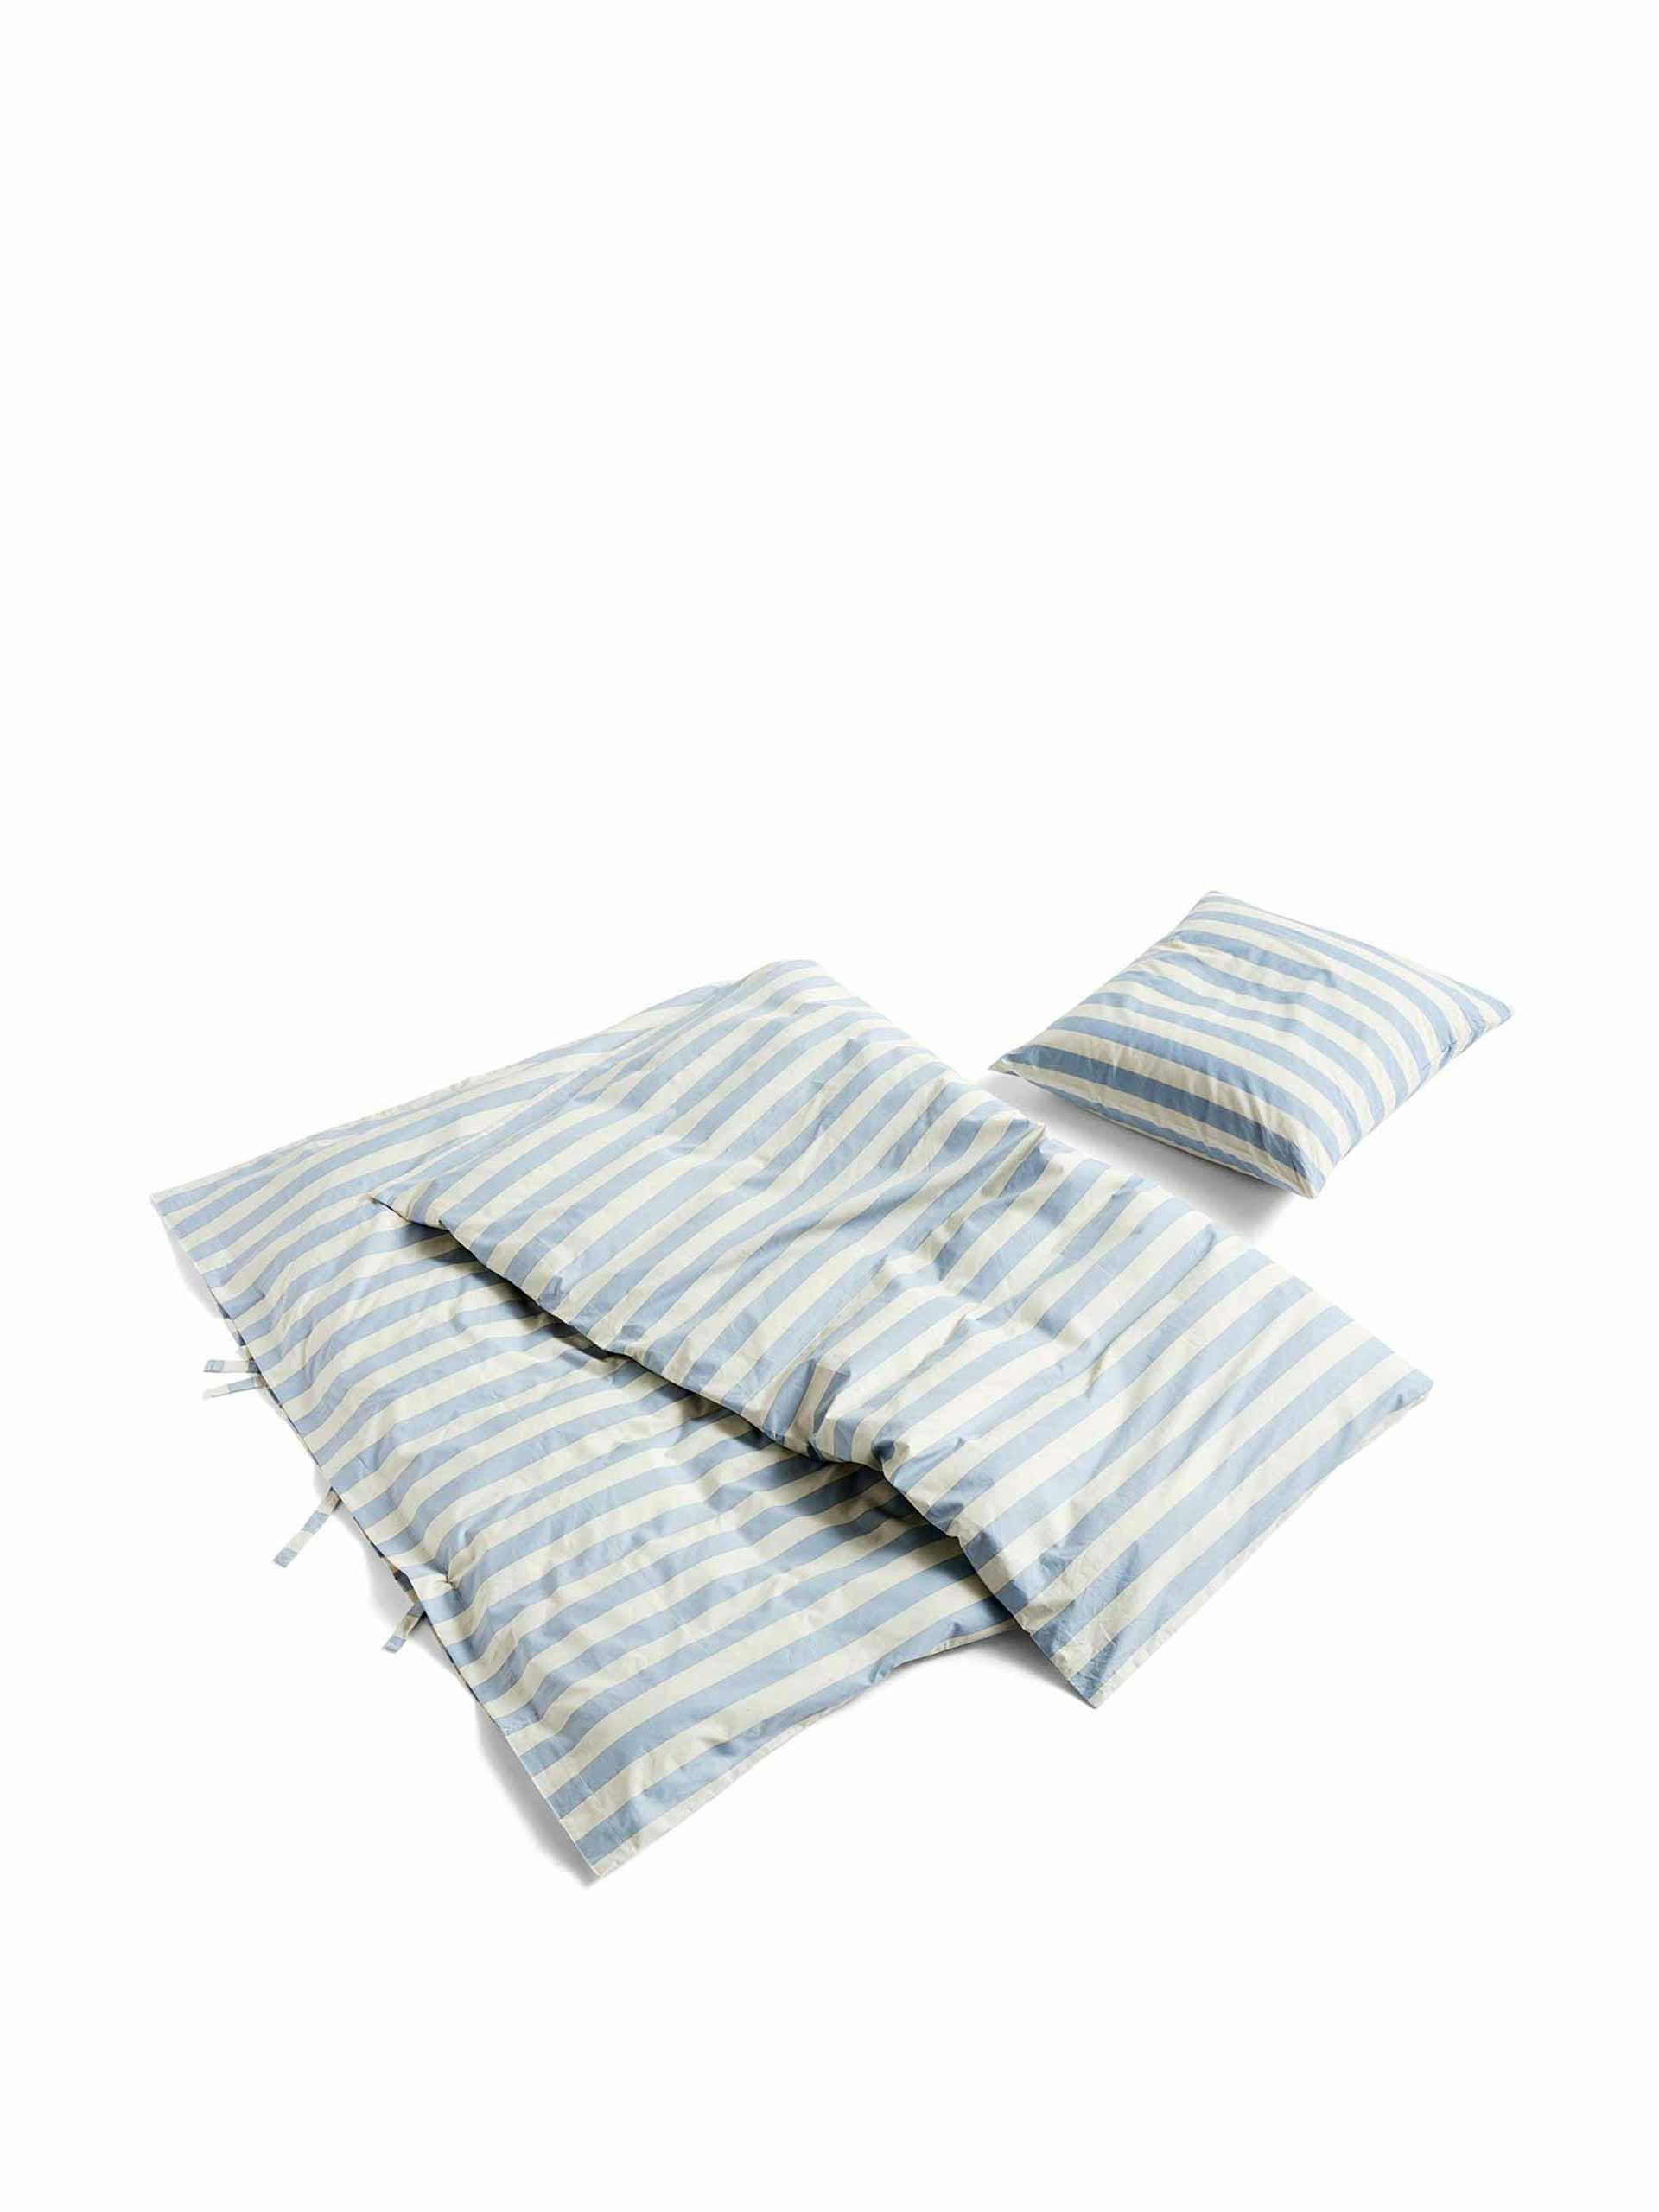 Blue and white striped linen set